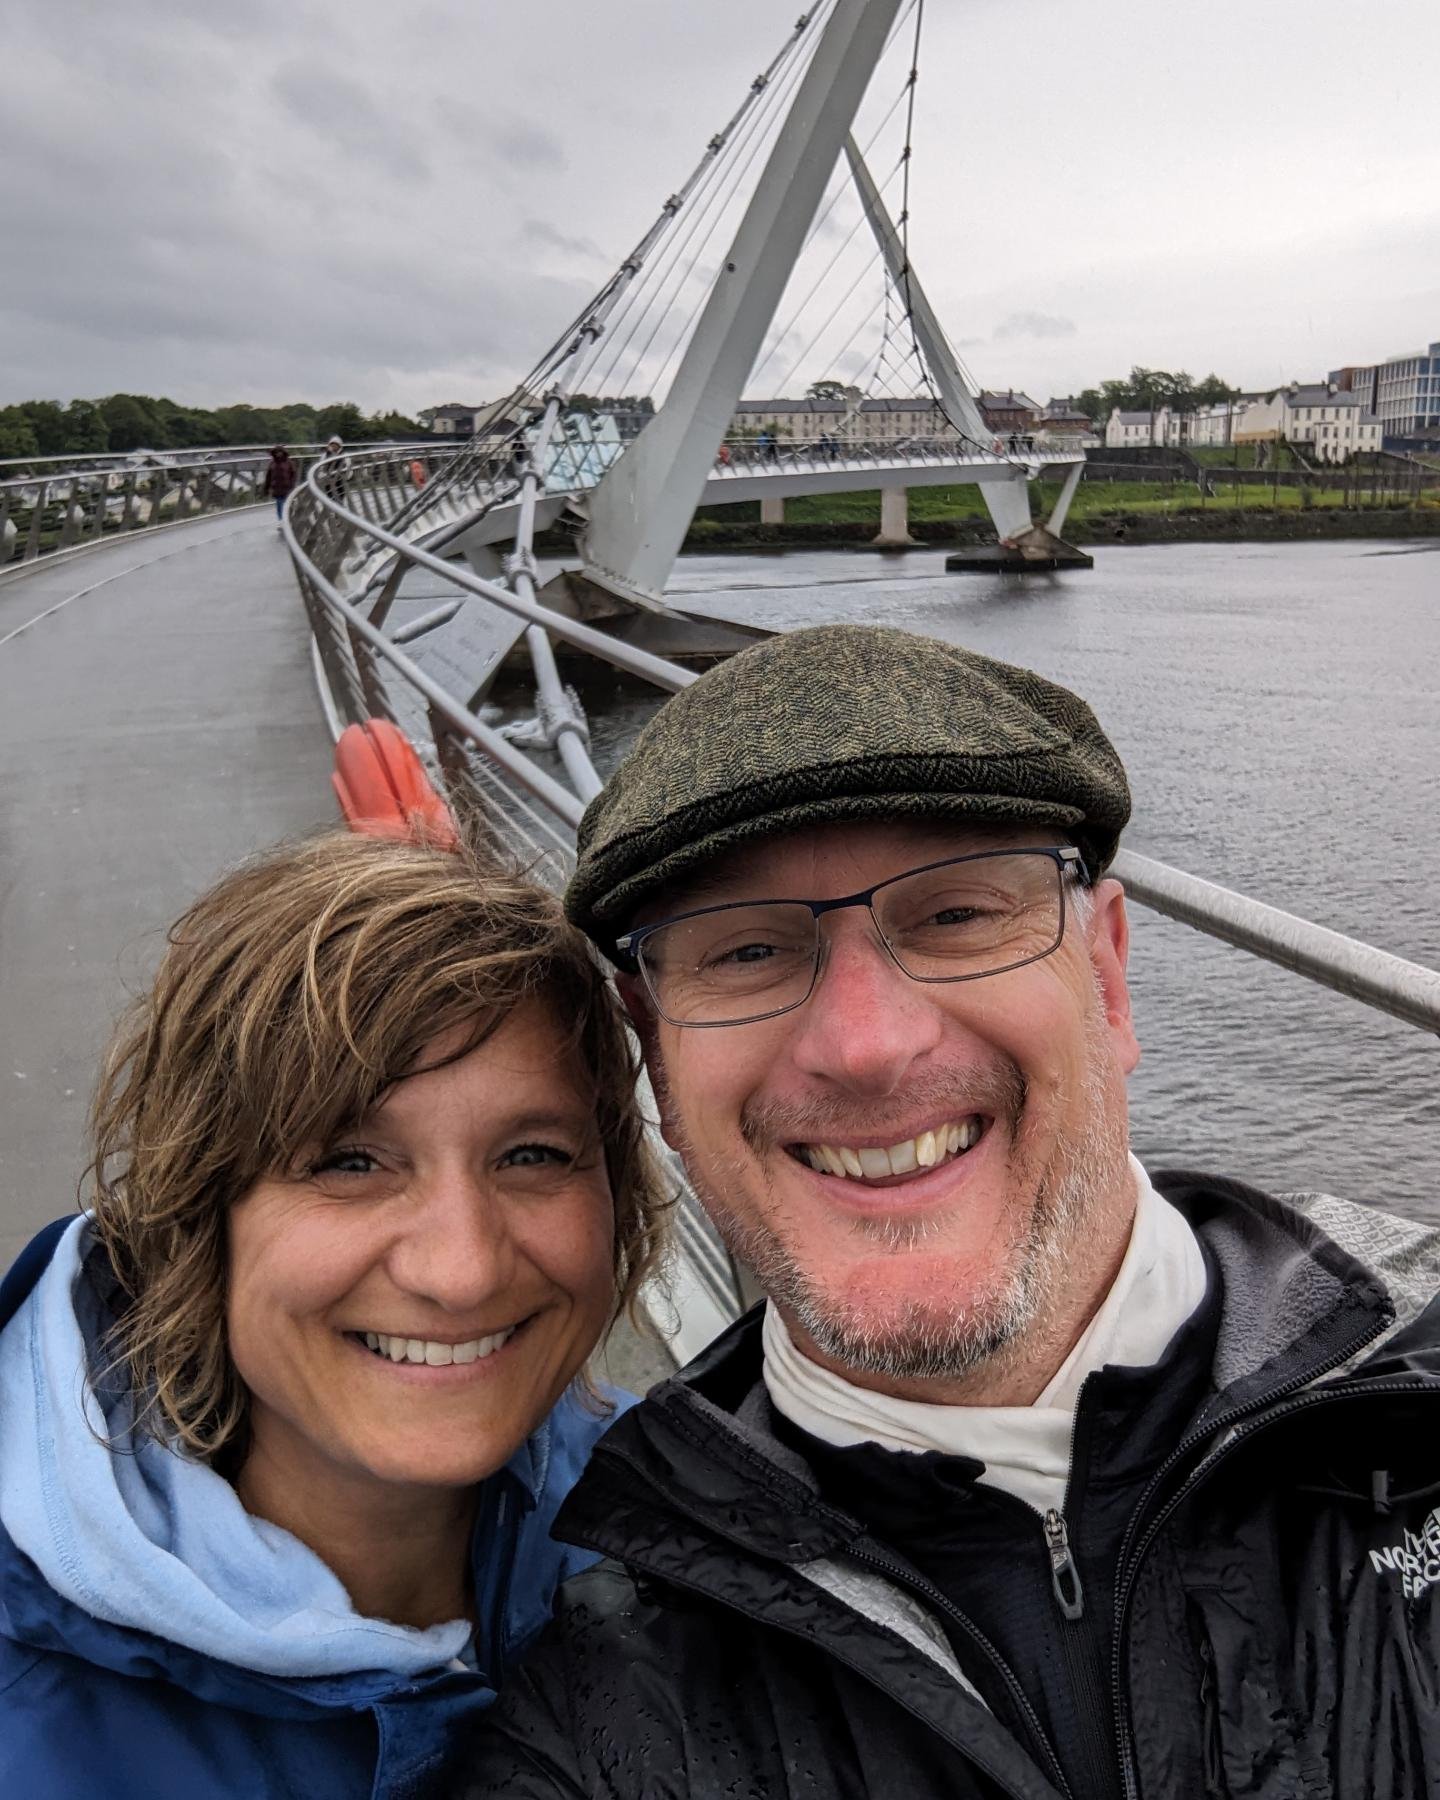 Settling right in to being tourists. Derry is beautiful!  Even in the rain.